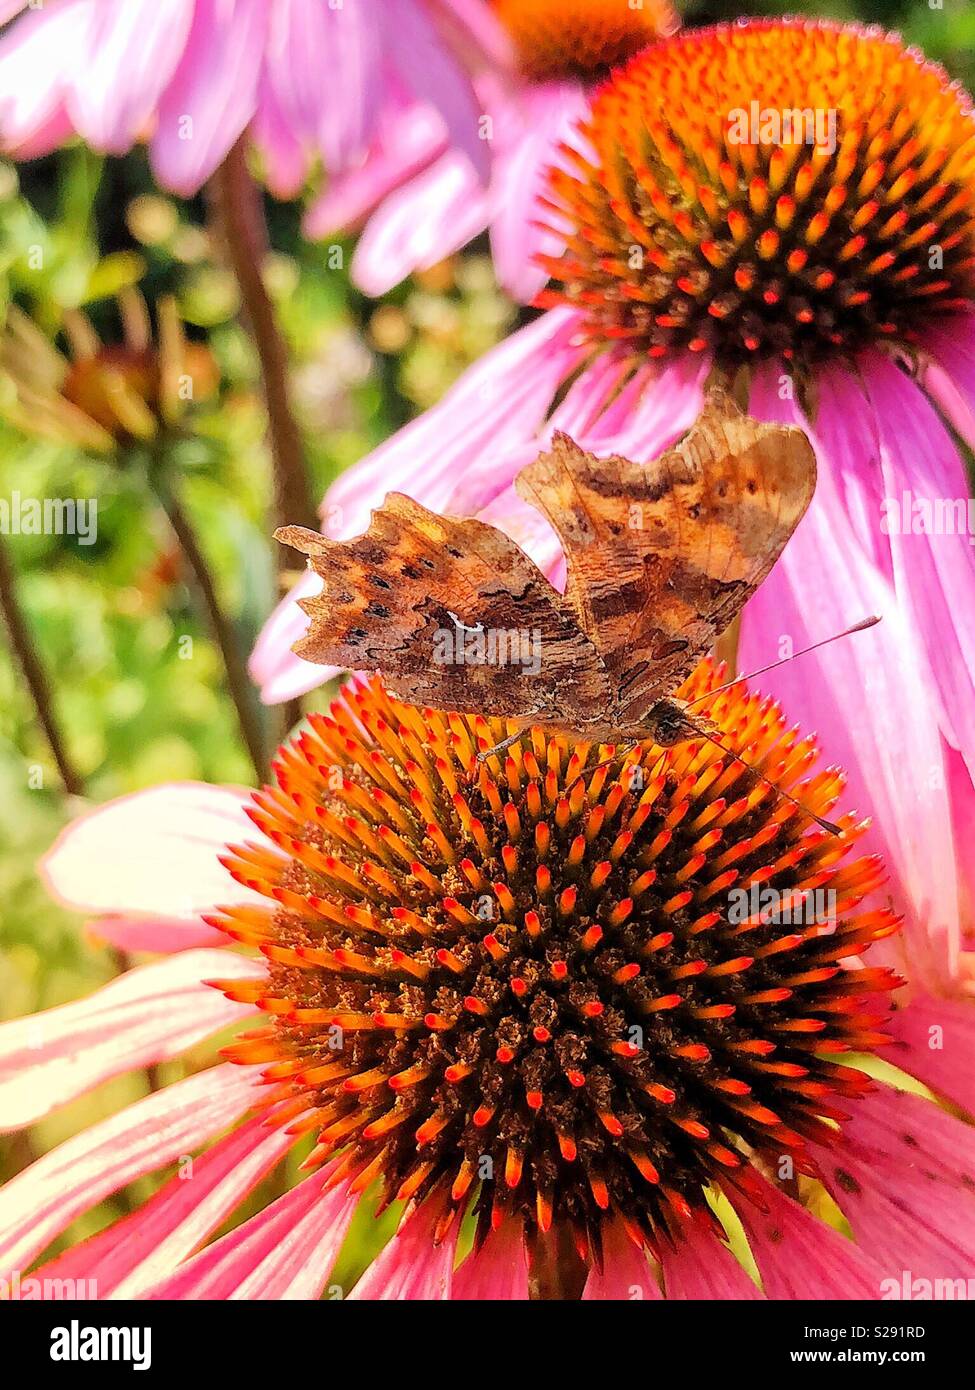 Comma butterfly with closed wings showing the white comma mark, resting on an echinacea, or coneflower Stock Photo